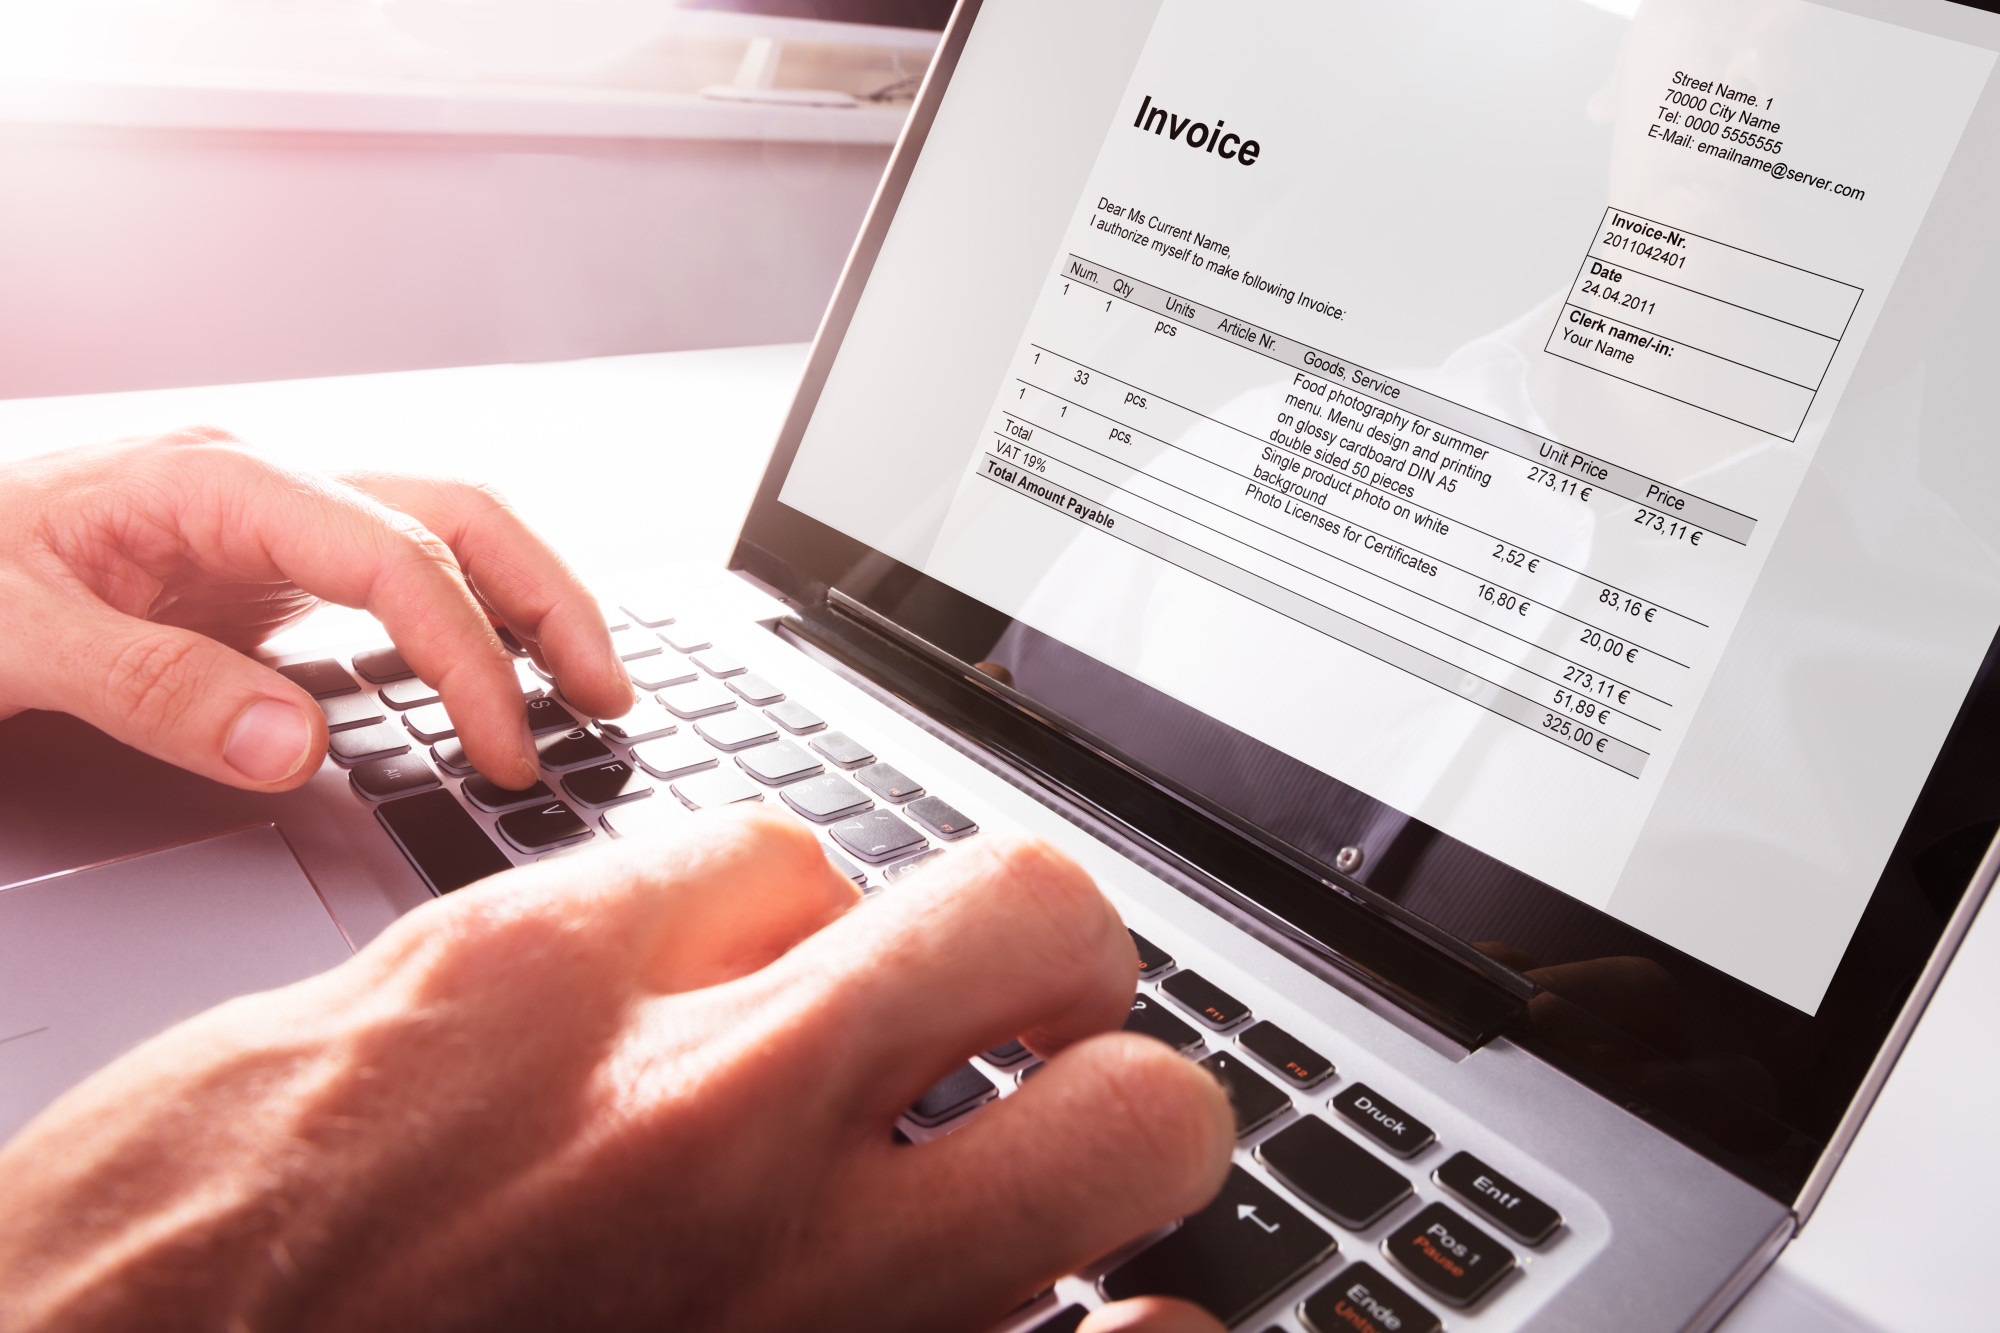 5 Important Tips on How to Invoice Your Clients and Get Paid